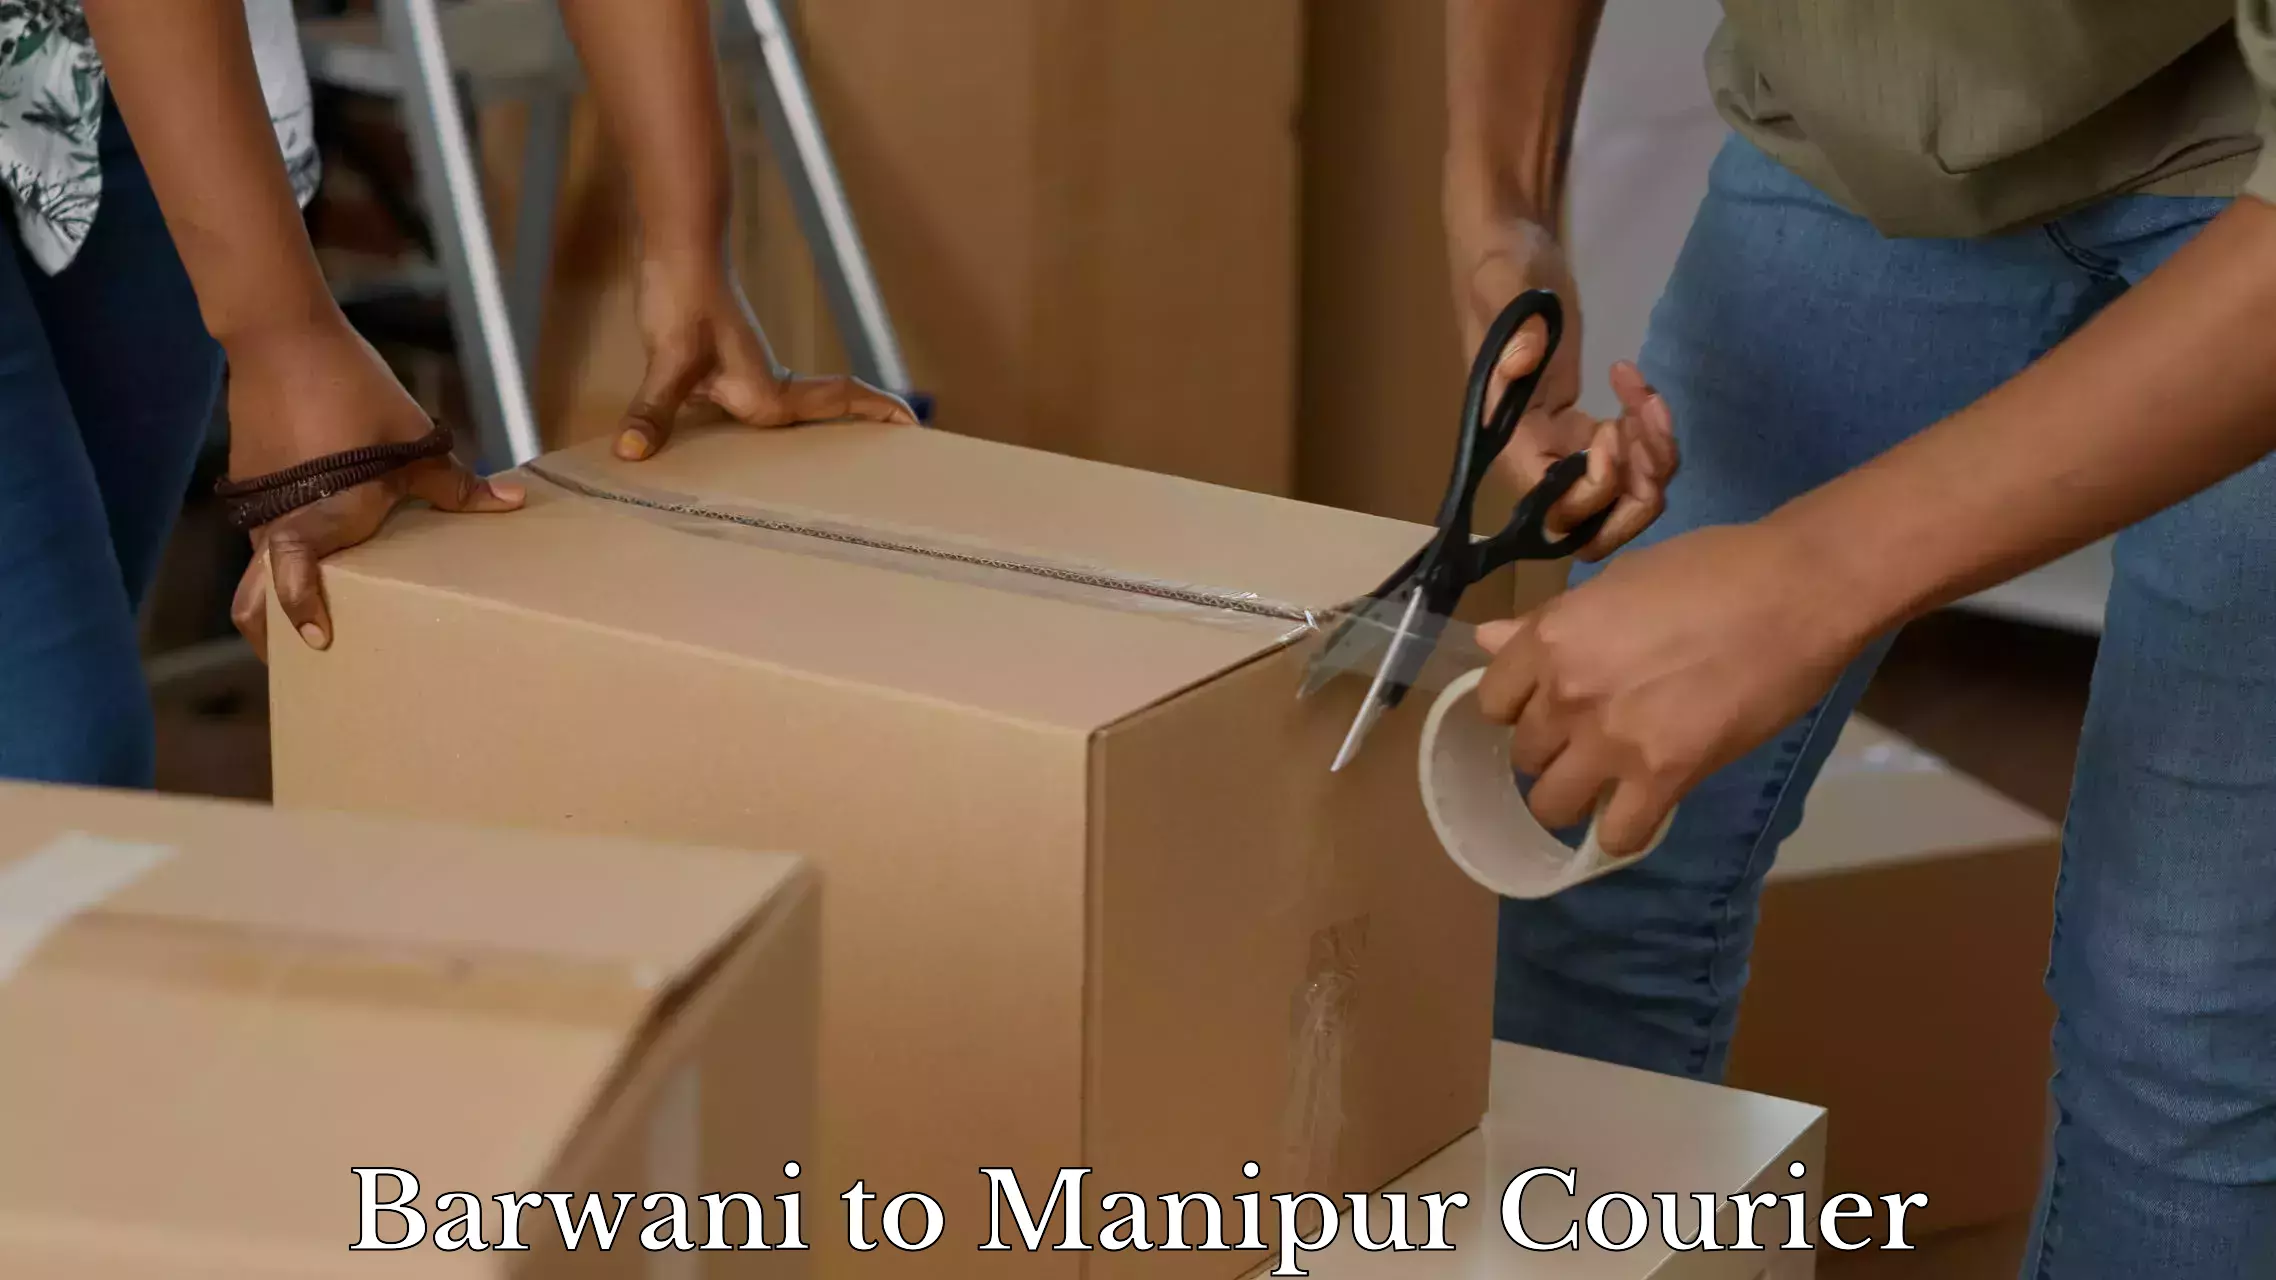 Instant baggage transport quote Barwani to Manipur